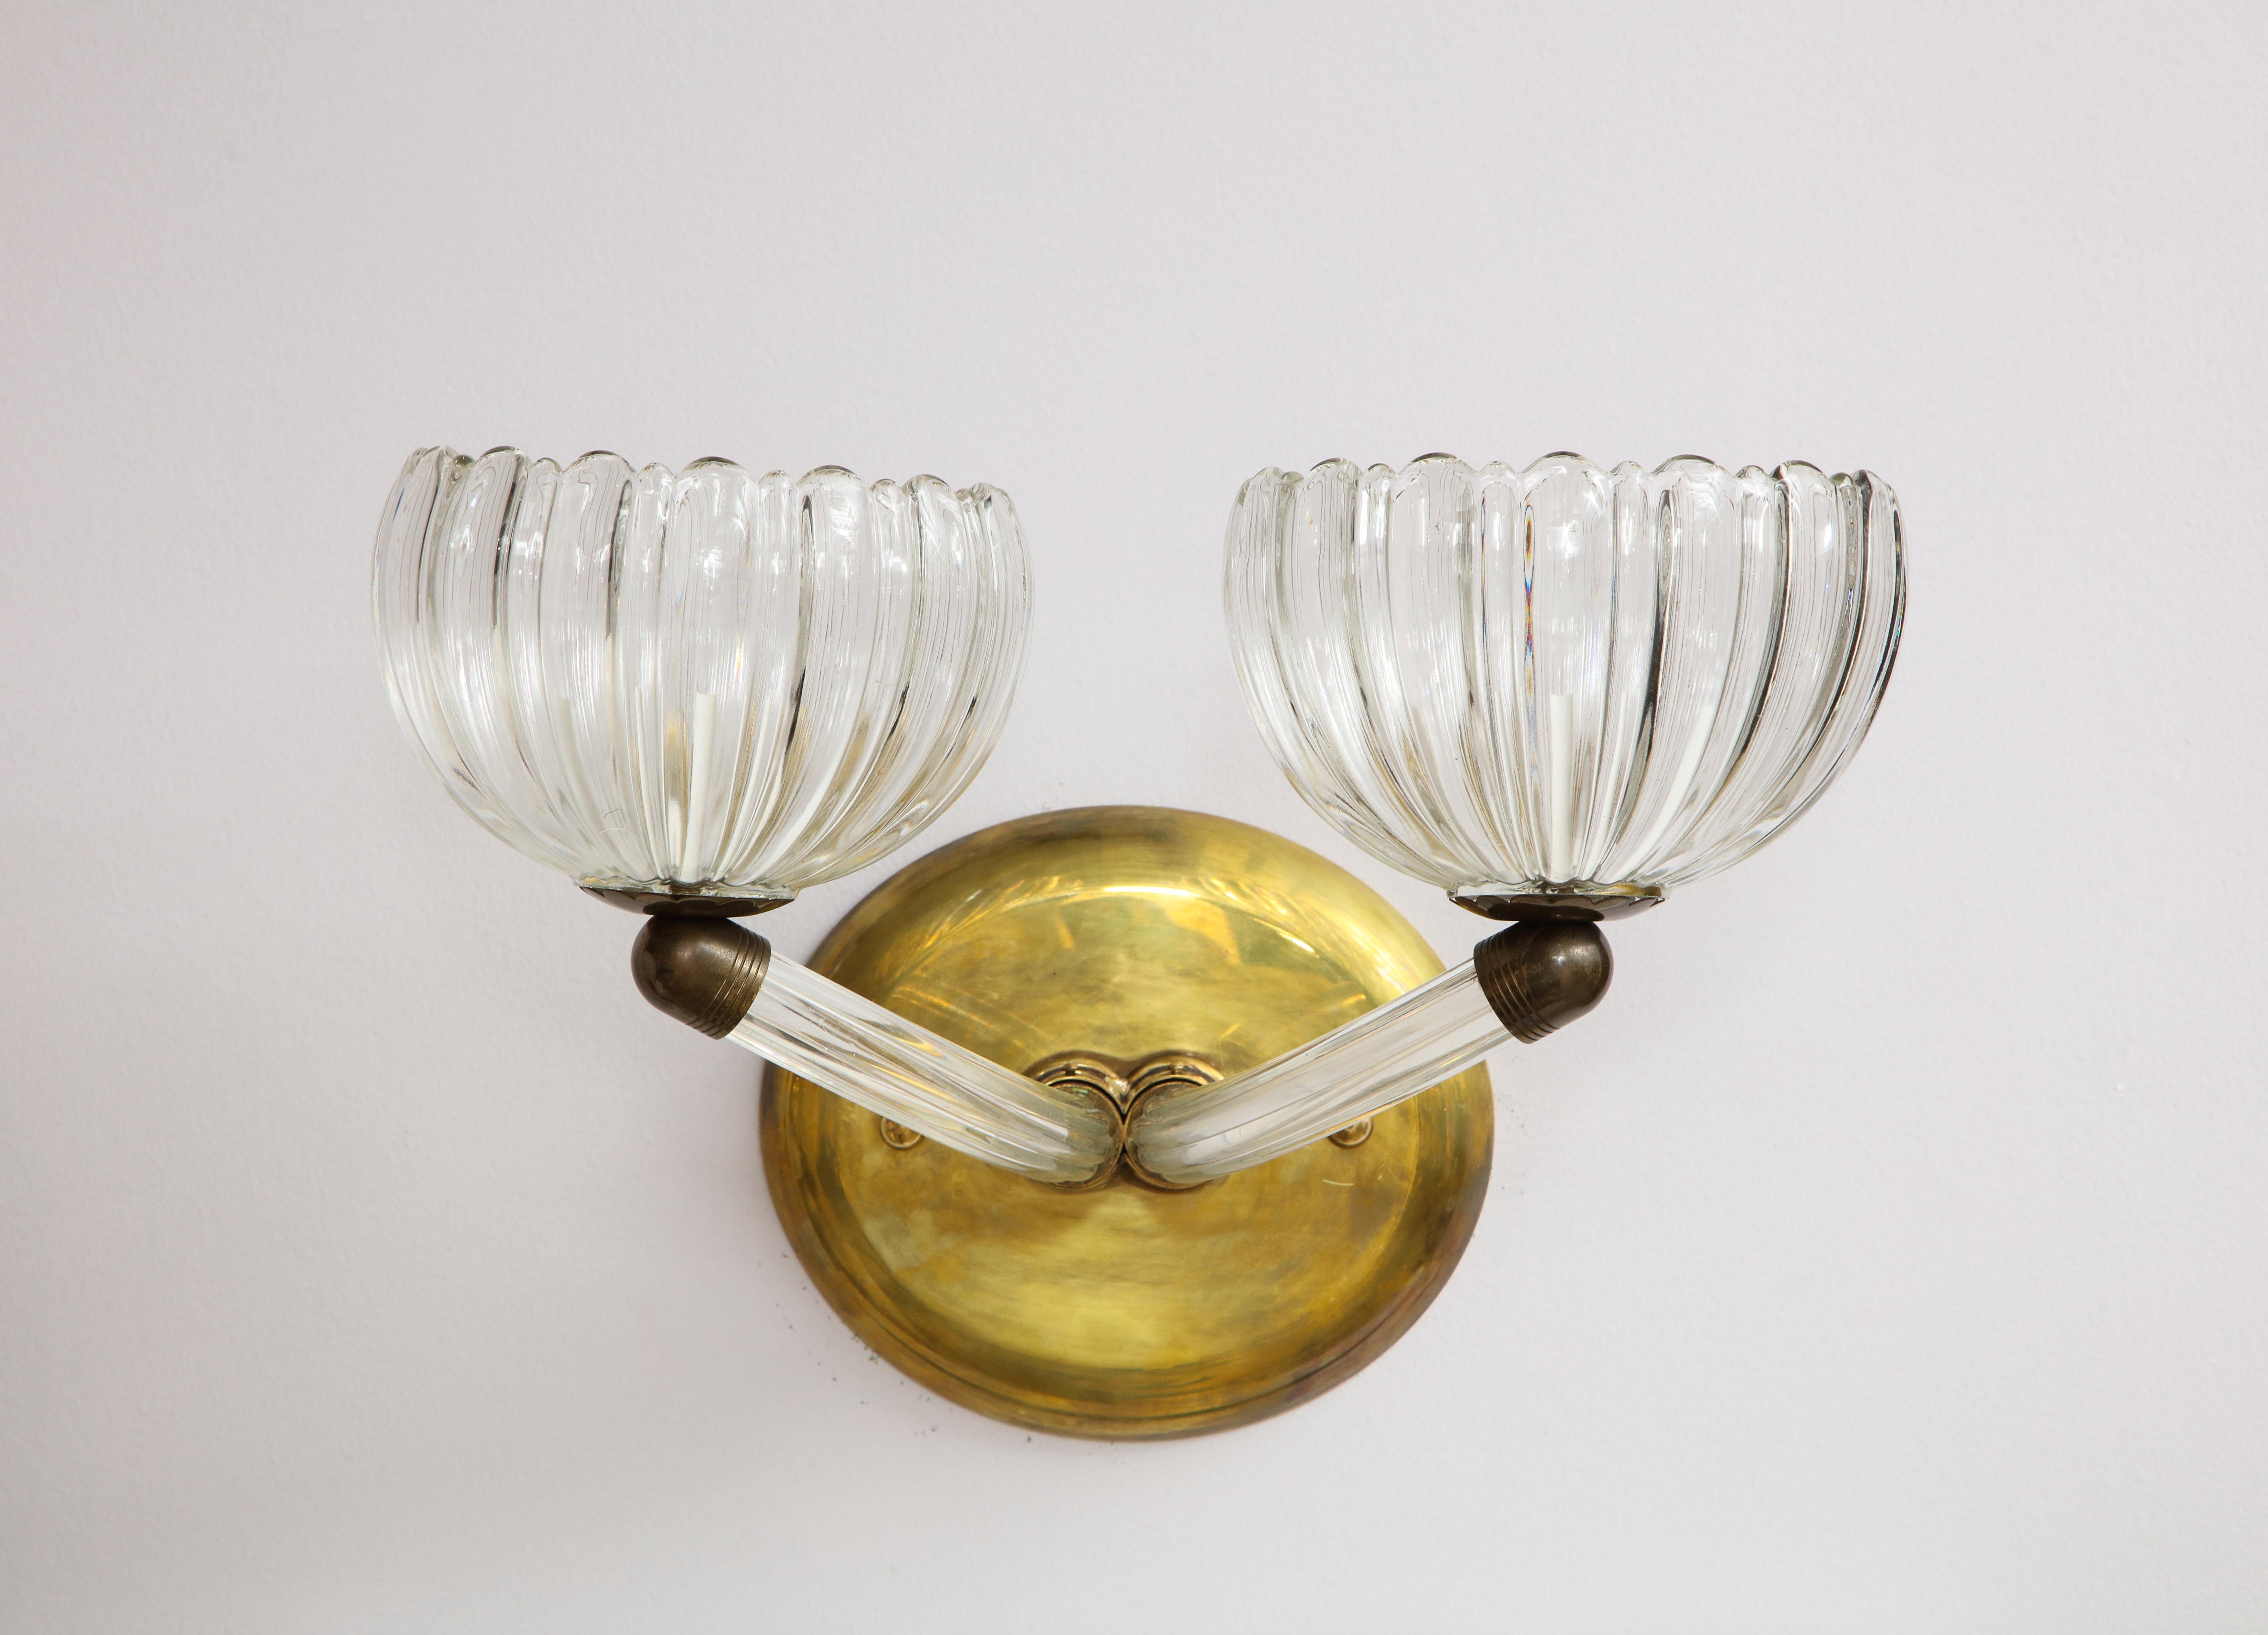 Pair of Italian Murano glass wall sconces with oval brass wall plaques; the molded glass with elegant scalloped design, each supported by upturned arms.
Italy, circa 1950 
Size: 17” wide x 12” deep / Plaque: 8” high x 9” wide.